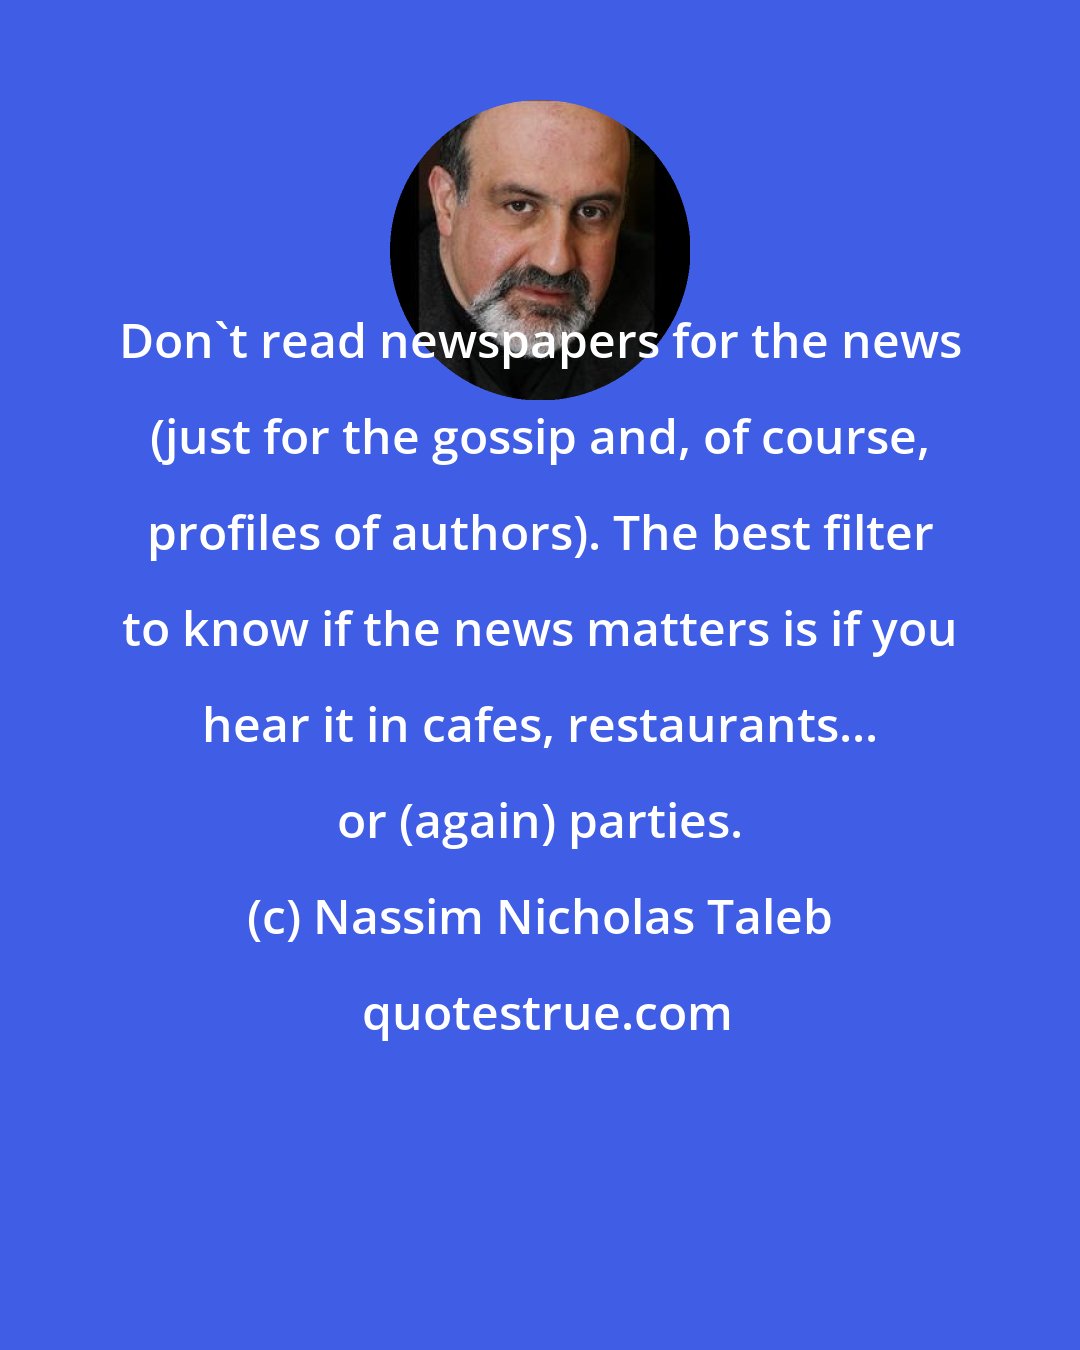 Nassim Nicholas Taleb: Don't read newspapers for the news (just for the gossip and, of course, profiles of authors). The best filter to know if the news matters is if you hear it in cafes, restaurants... or (again) parties.